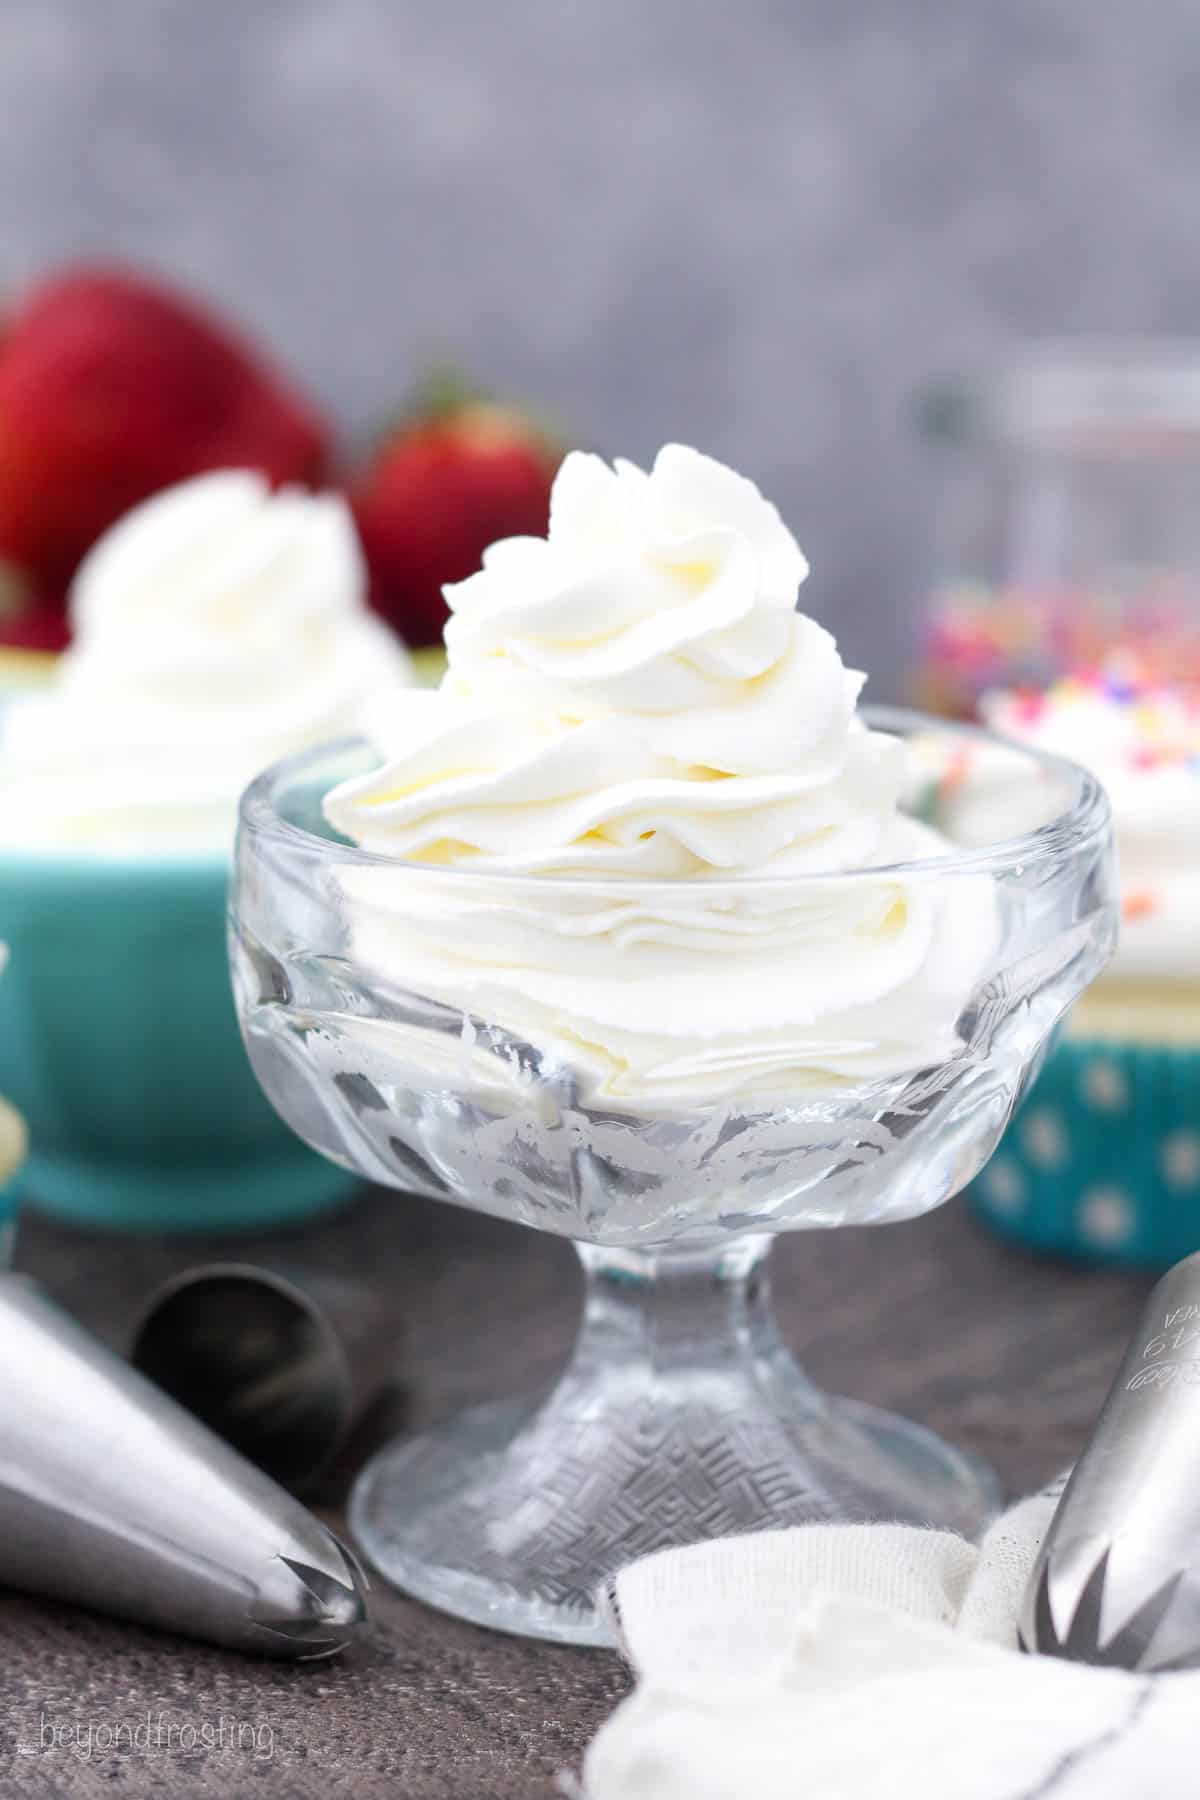 Homemade whipped cream piped into a glass goblet.